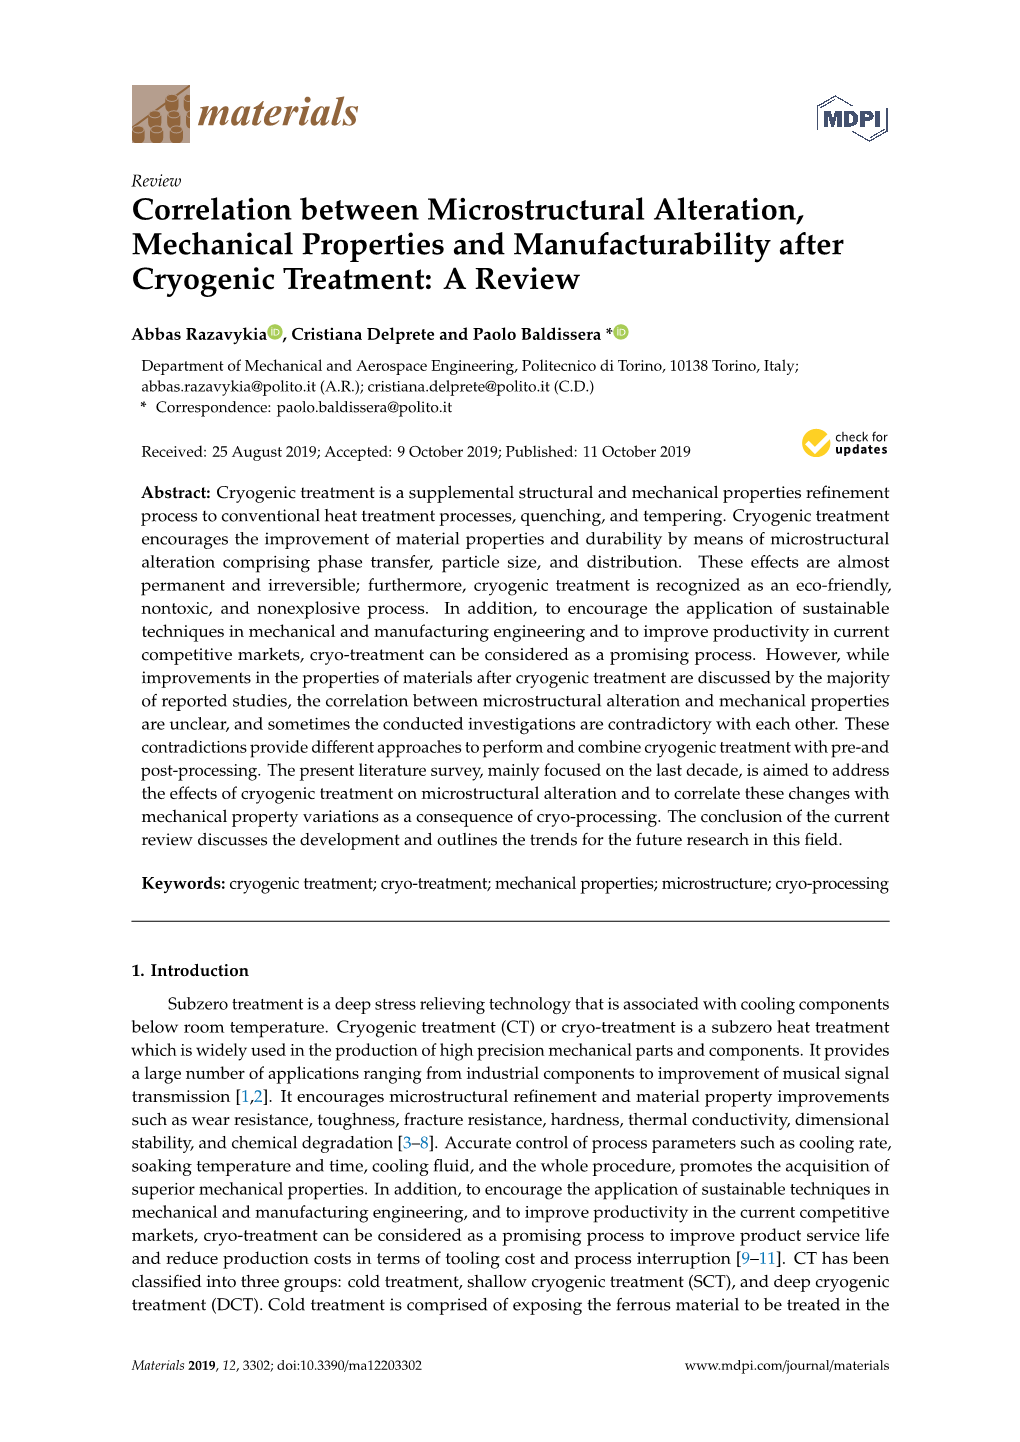 Correlation Between Microstructural Alteration, Mechanical Properties and Manufacturability After Cryogenic Treatment: a Review